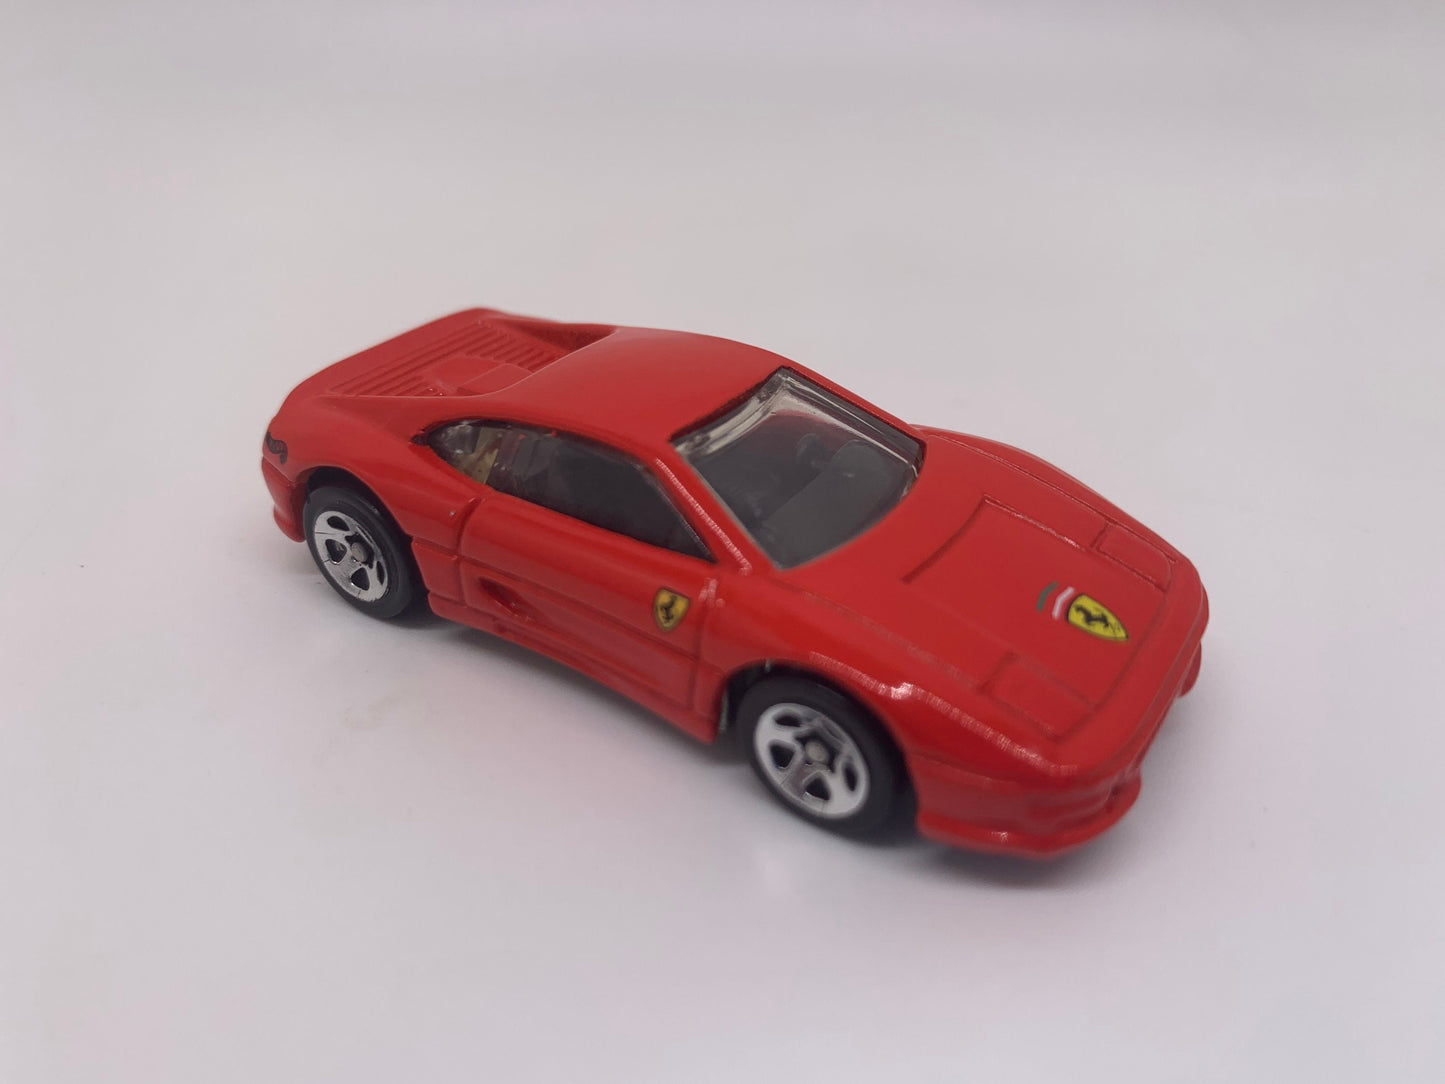 Hot Wheels Ferrari F355 Red Mainline #172 Perfect Birthday Gift Miniature Collectable Model Toy Car